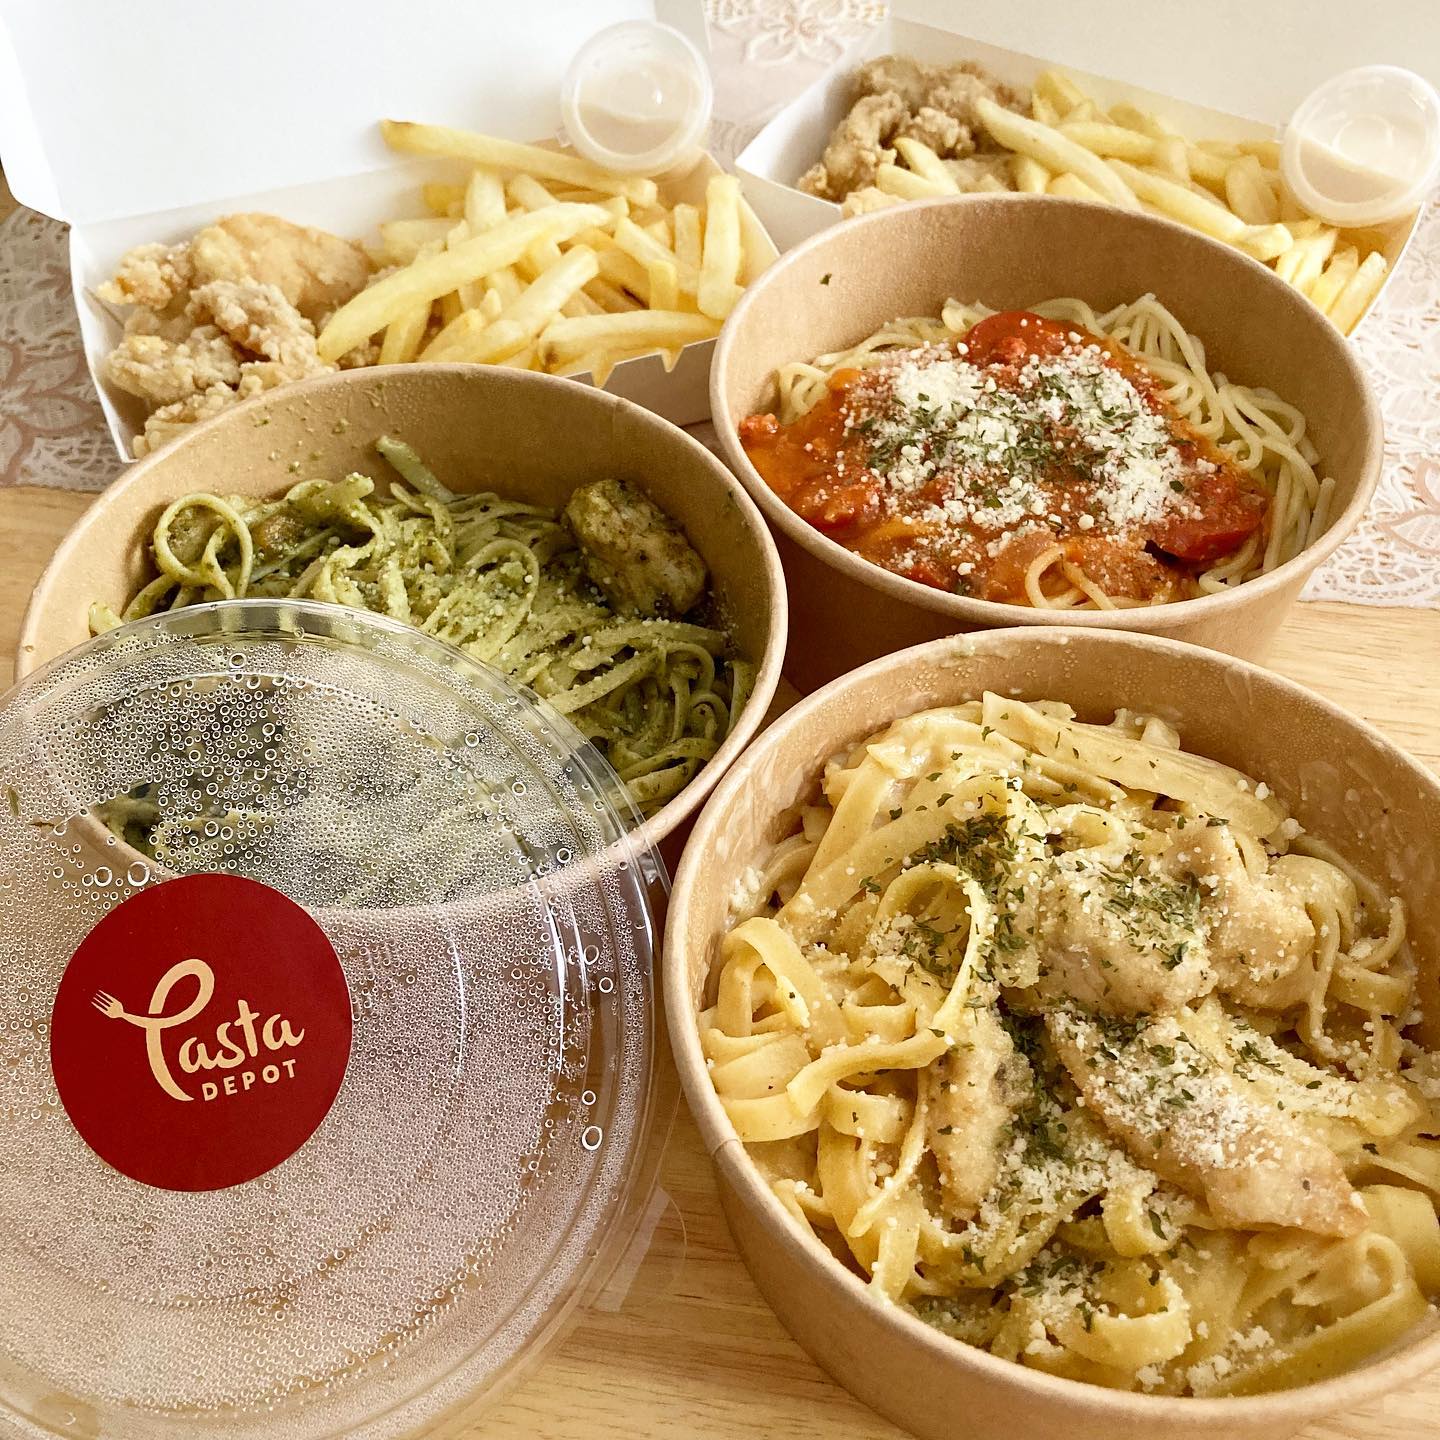 Special days call for special food. Found @pastadepot on Grab and got curious so I ordered different variants: Classic Spaghetti, Chicken Alfredo, and Creamy Chicken Pesto. Included 2 orders of Fish and Fries as well for snacks (or dinner, if we get busy with work later). First time to try these, but can I just say, the pesto smells goooood.

Tagal naman mag-lunch.

#food #foodstagram #instafood #pasta #pestopasta #spaghetti #chickenalfredo #pastadepot